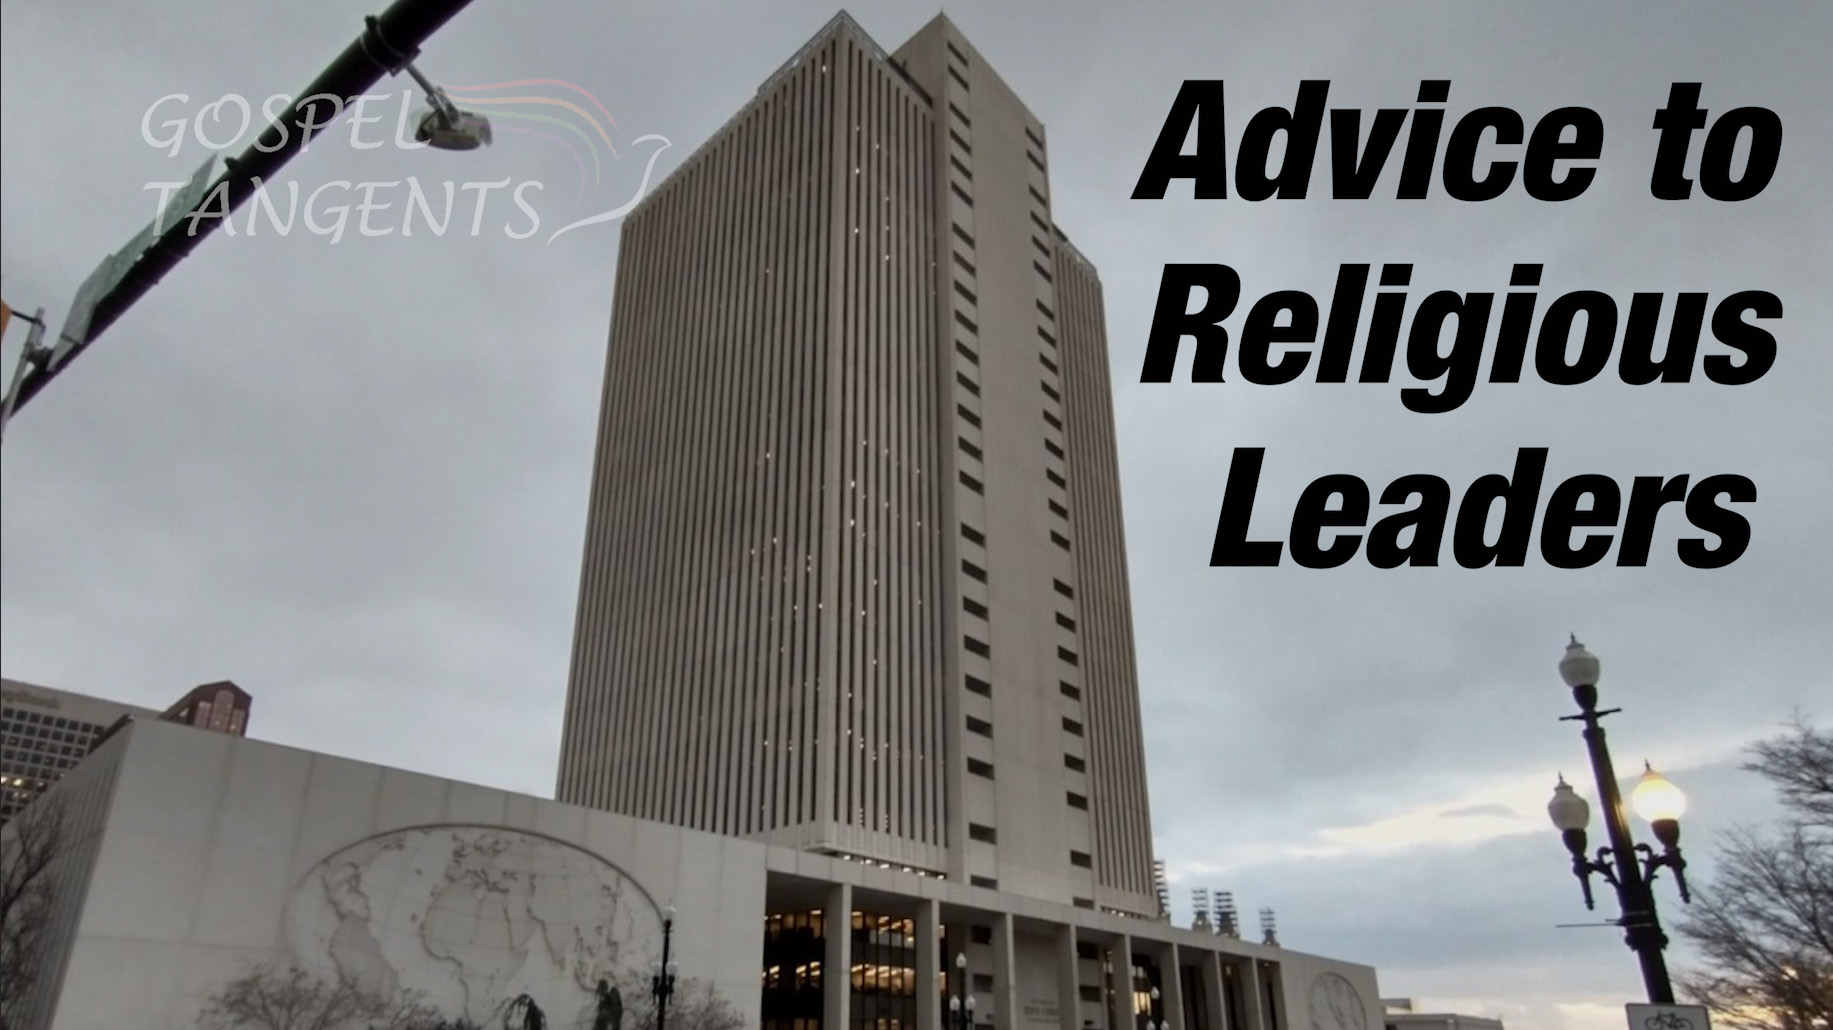 I asked Dr. Sally Gordon to give advice to religious leaders about culture war issues.